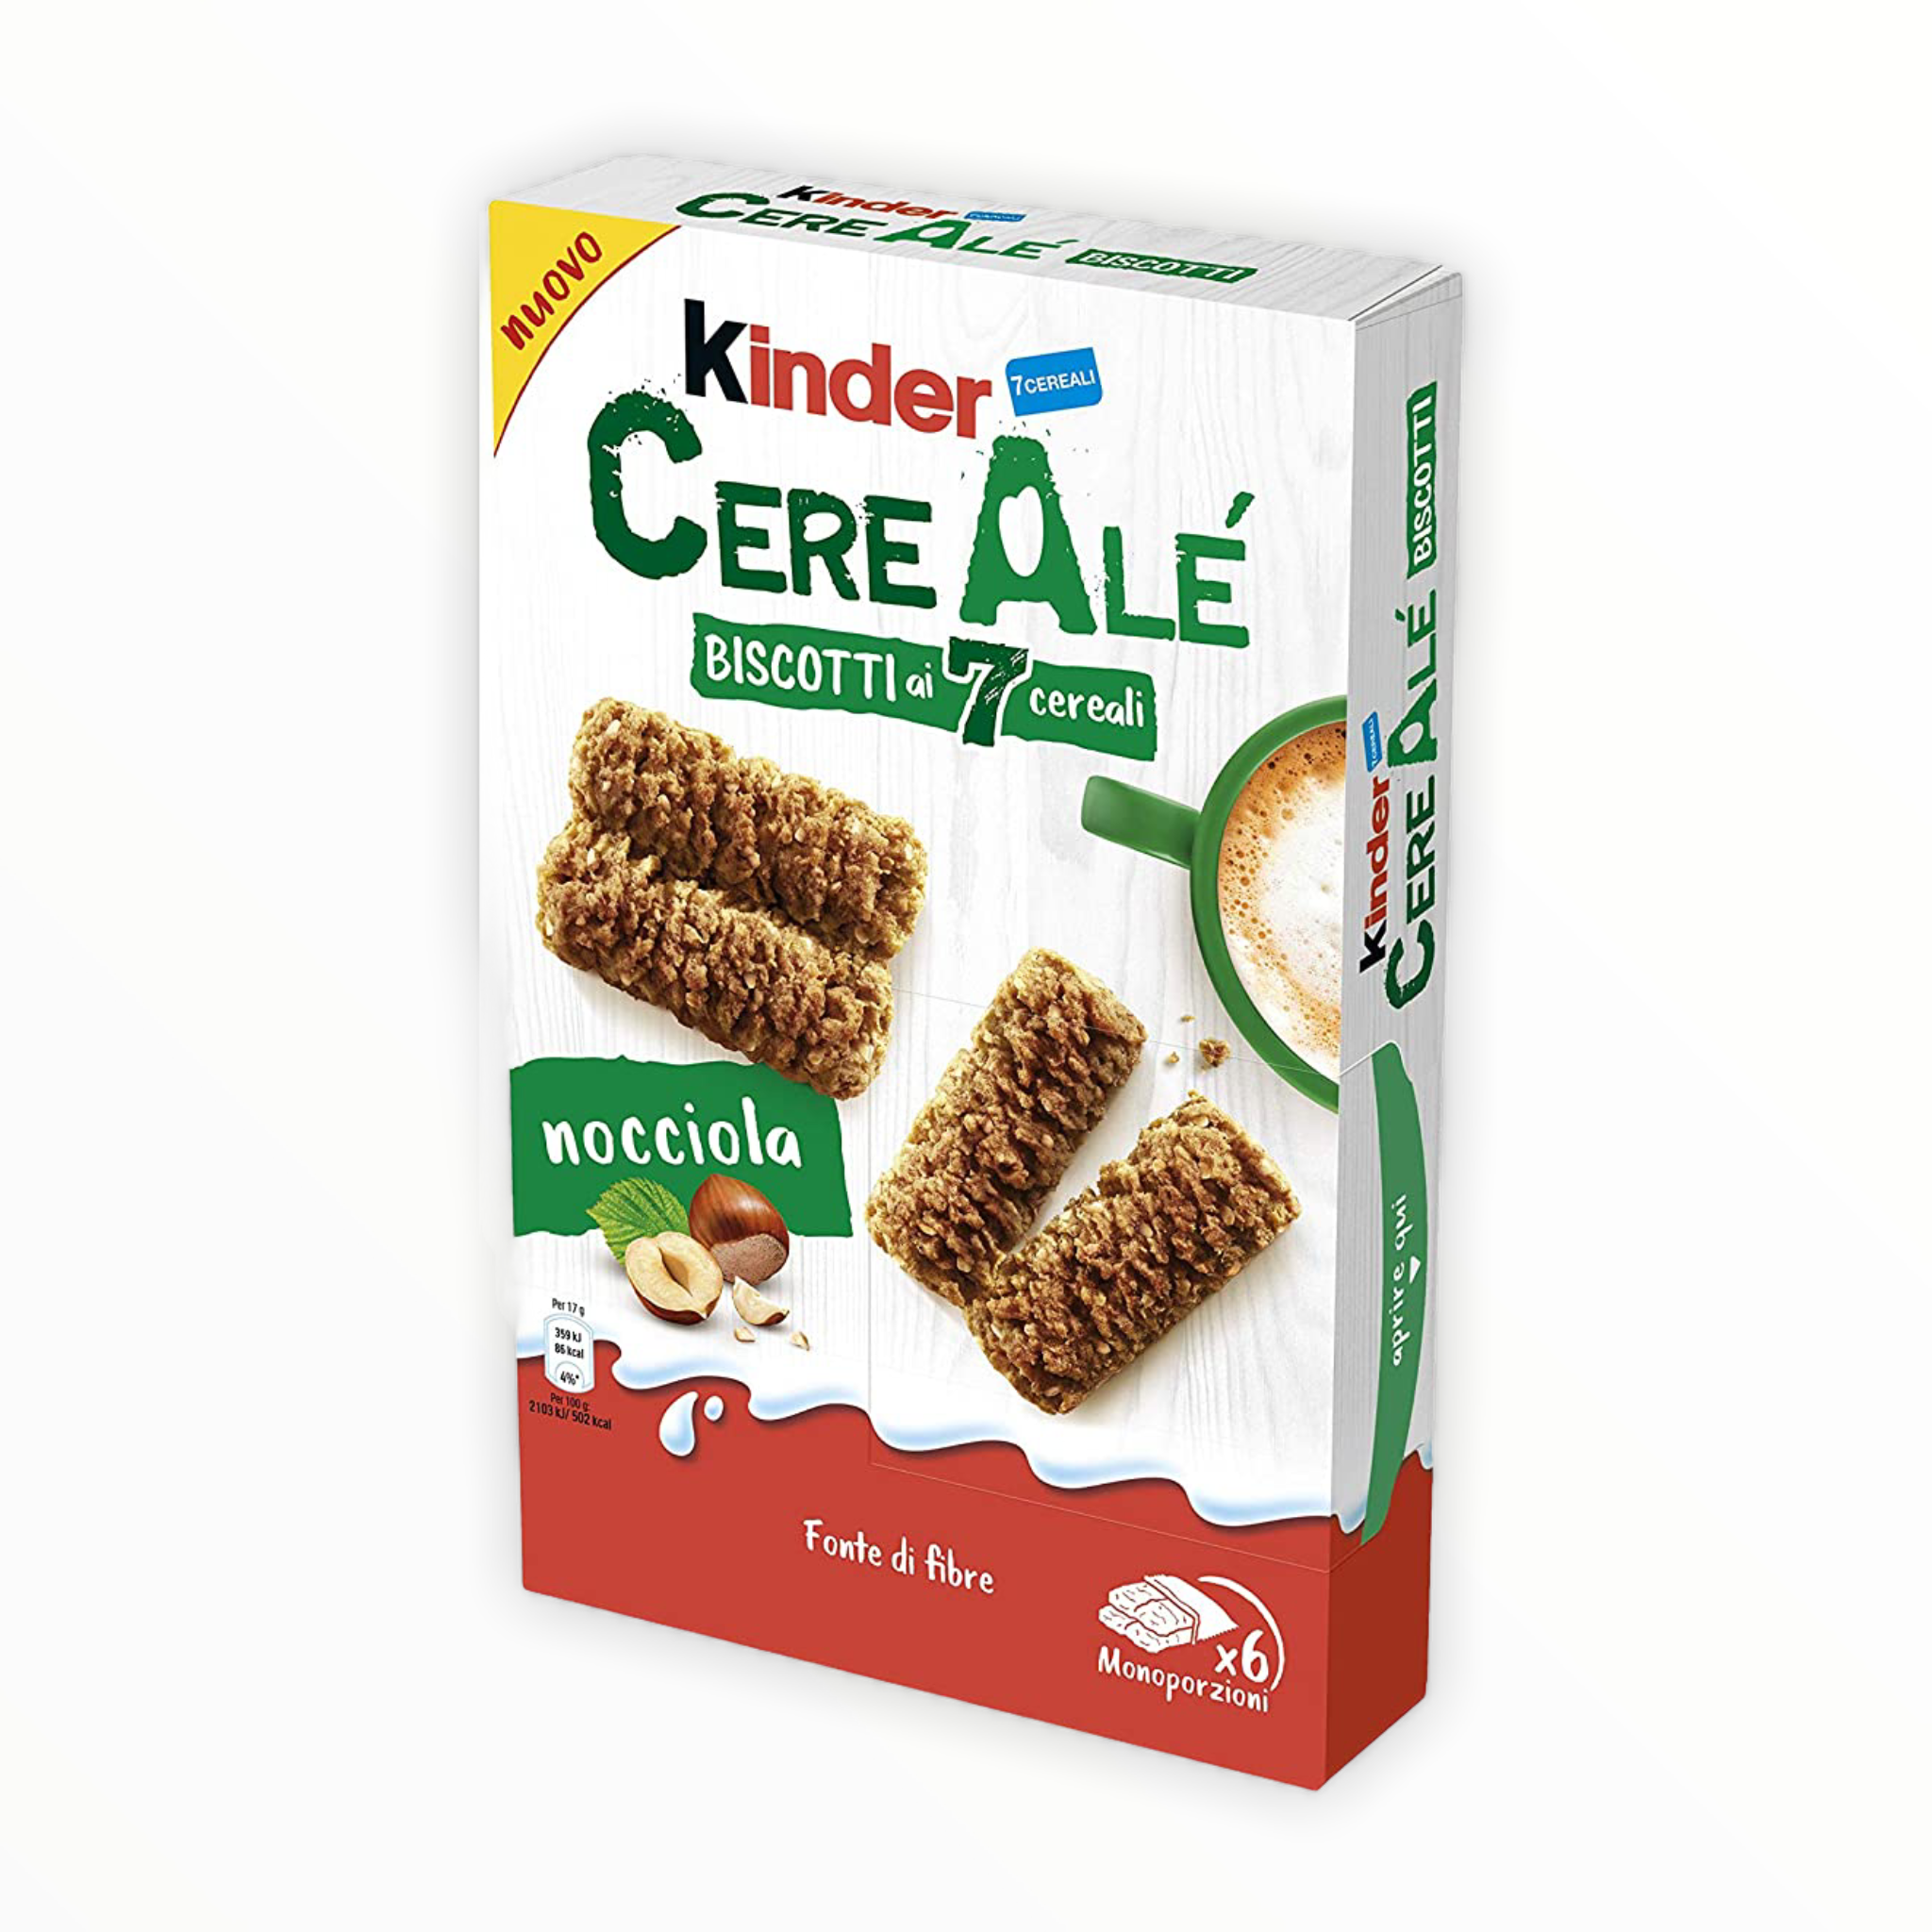 Kinder cards 2 biscuits – Made In Eatalia